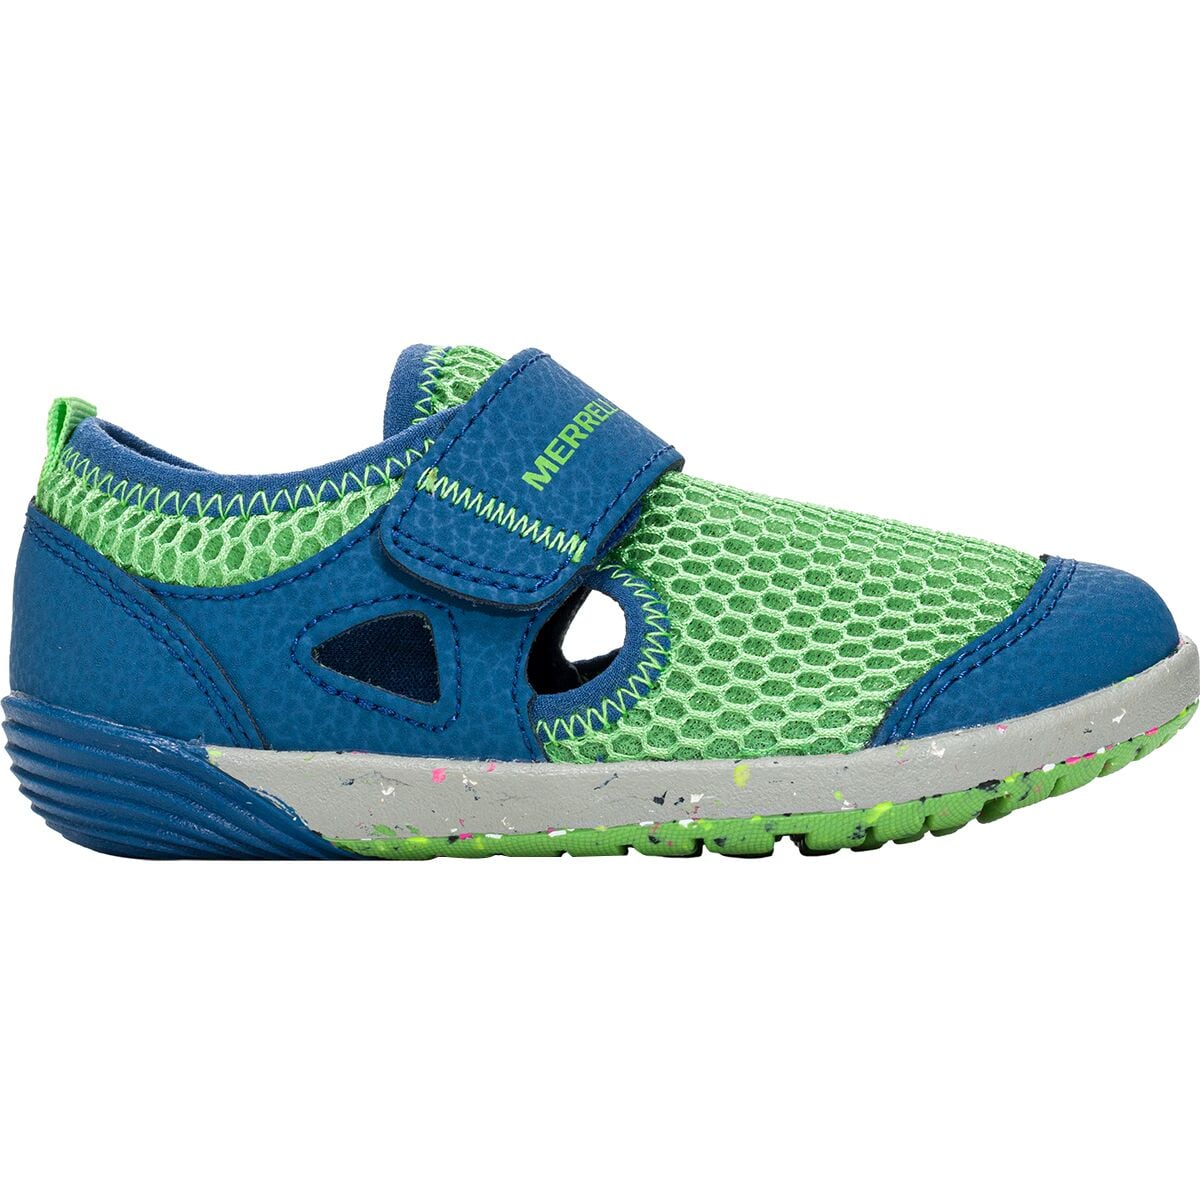 Merrell Bare Steps H20 Shoe - Toddlers'